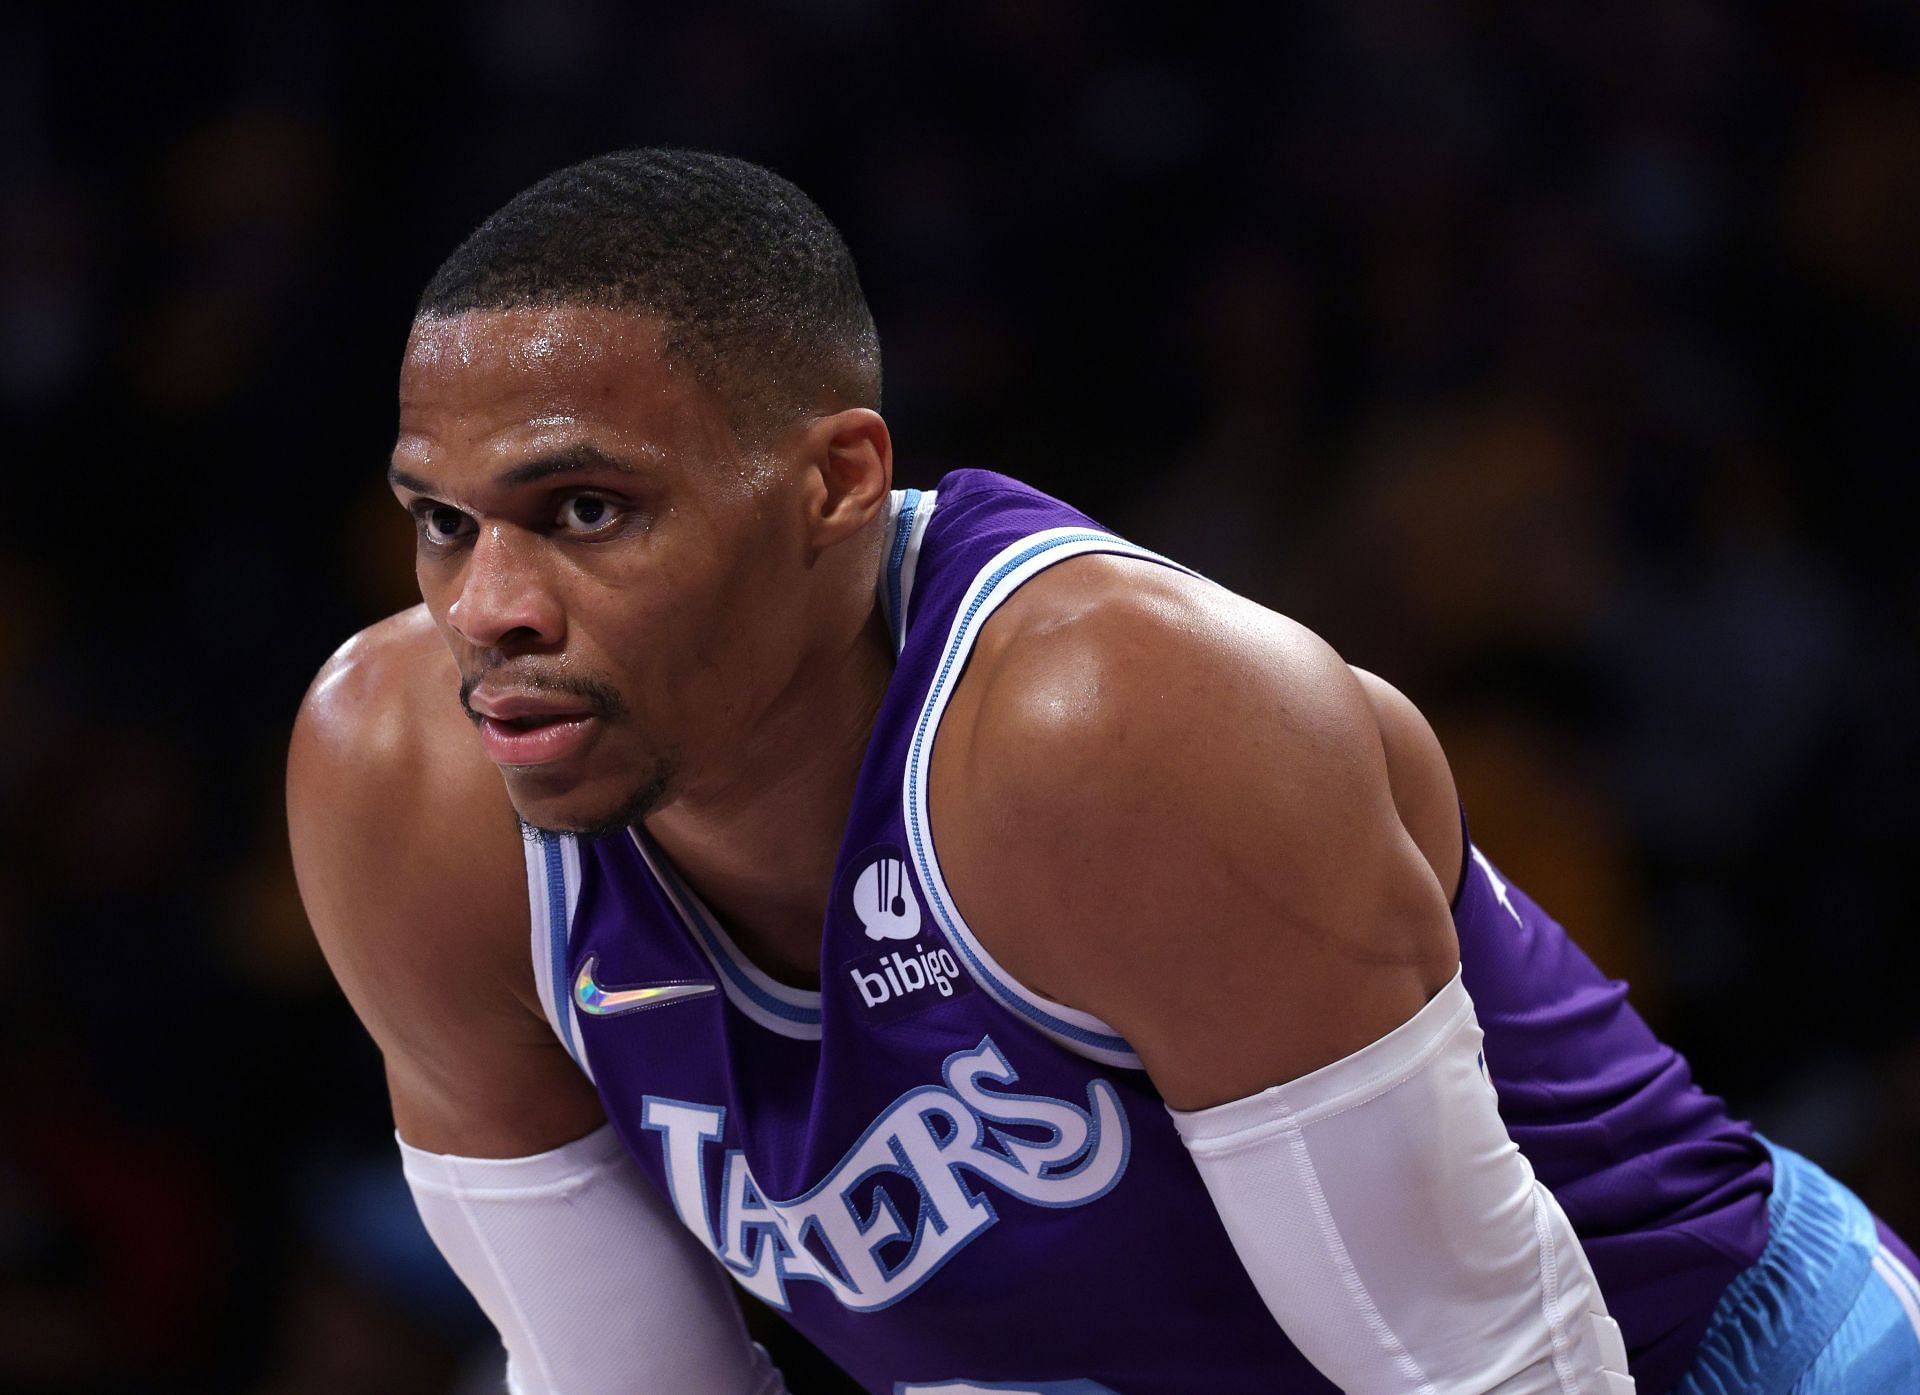 LA Lakers guard Russell Westbrook aims to get back on track.